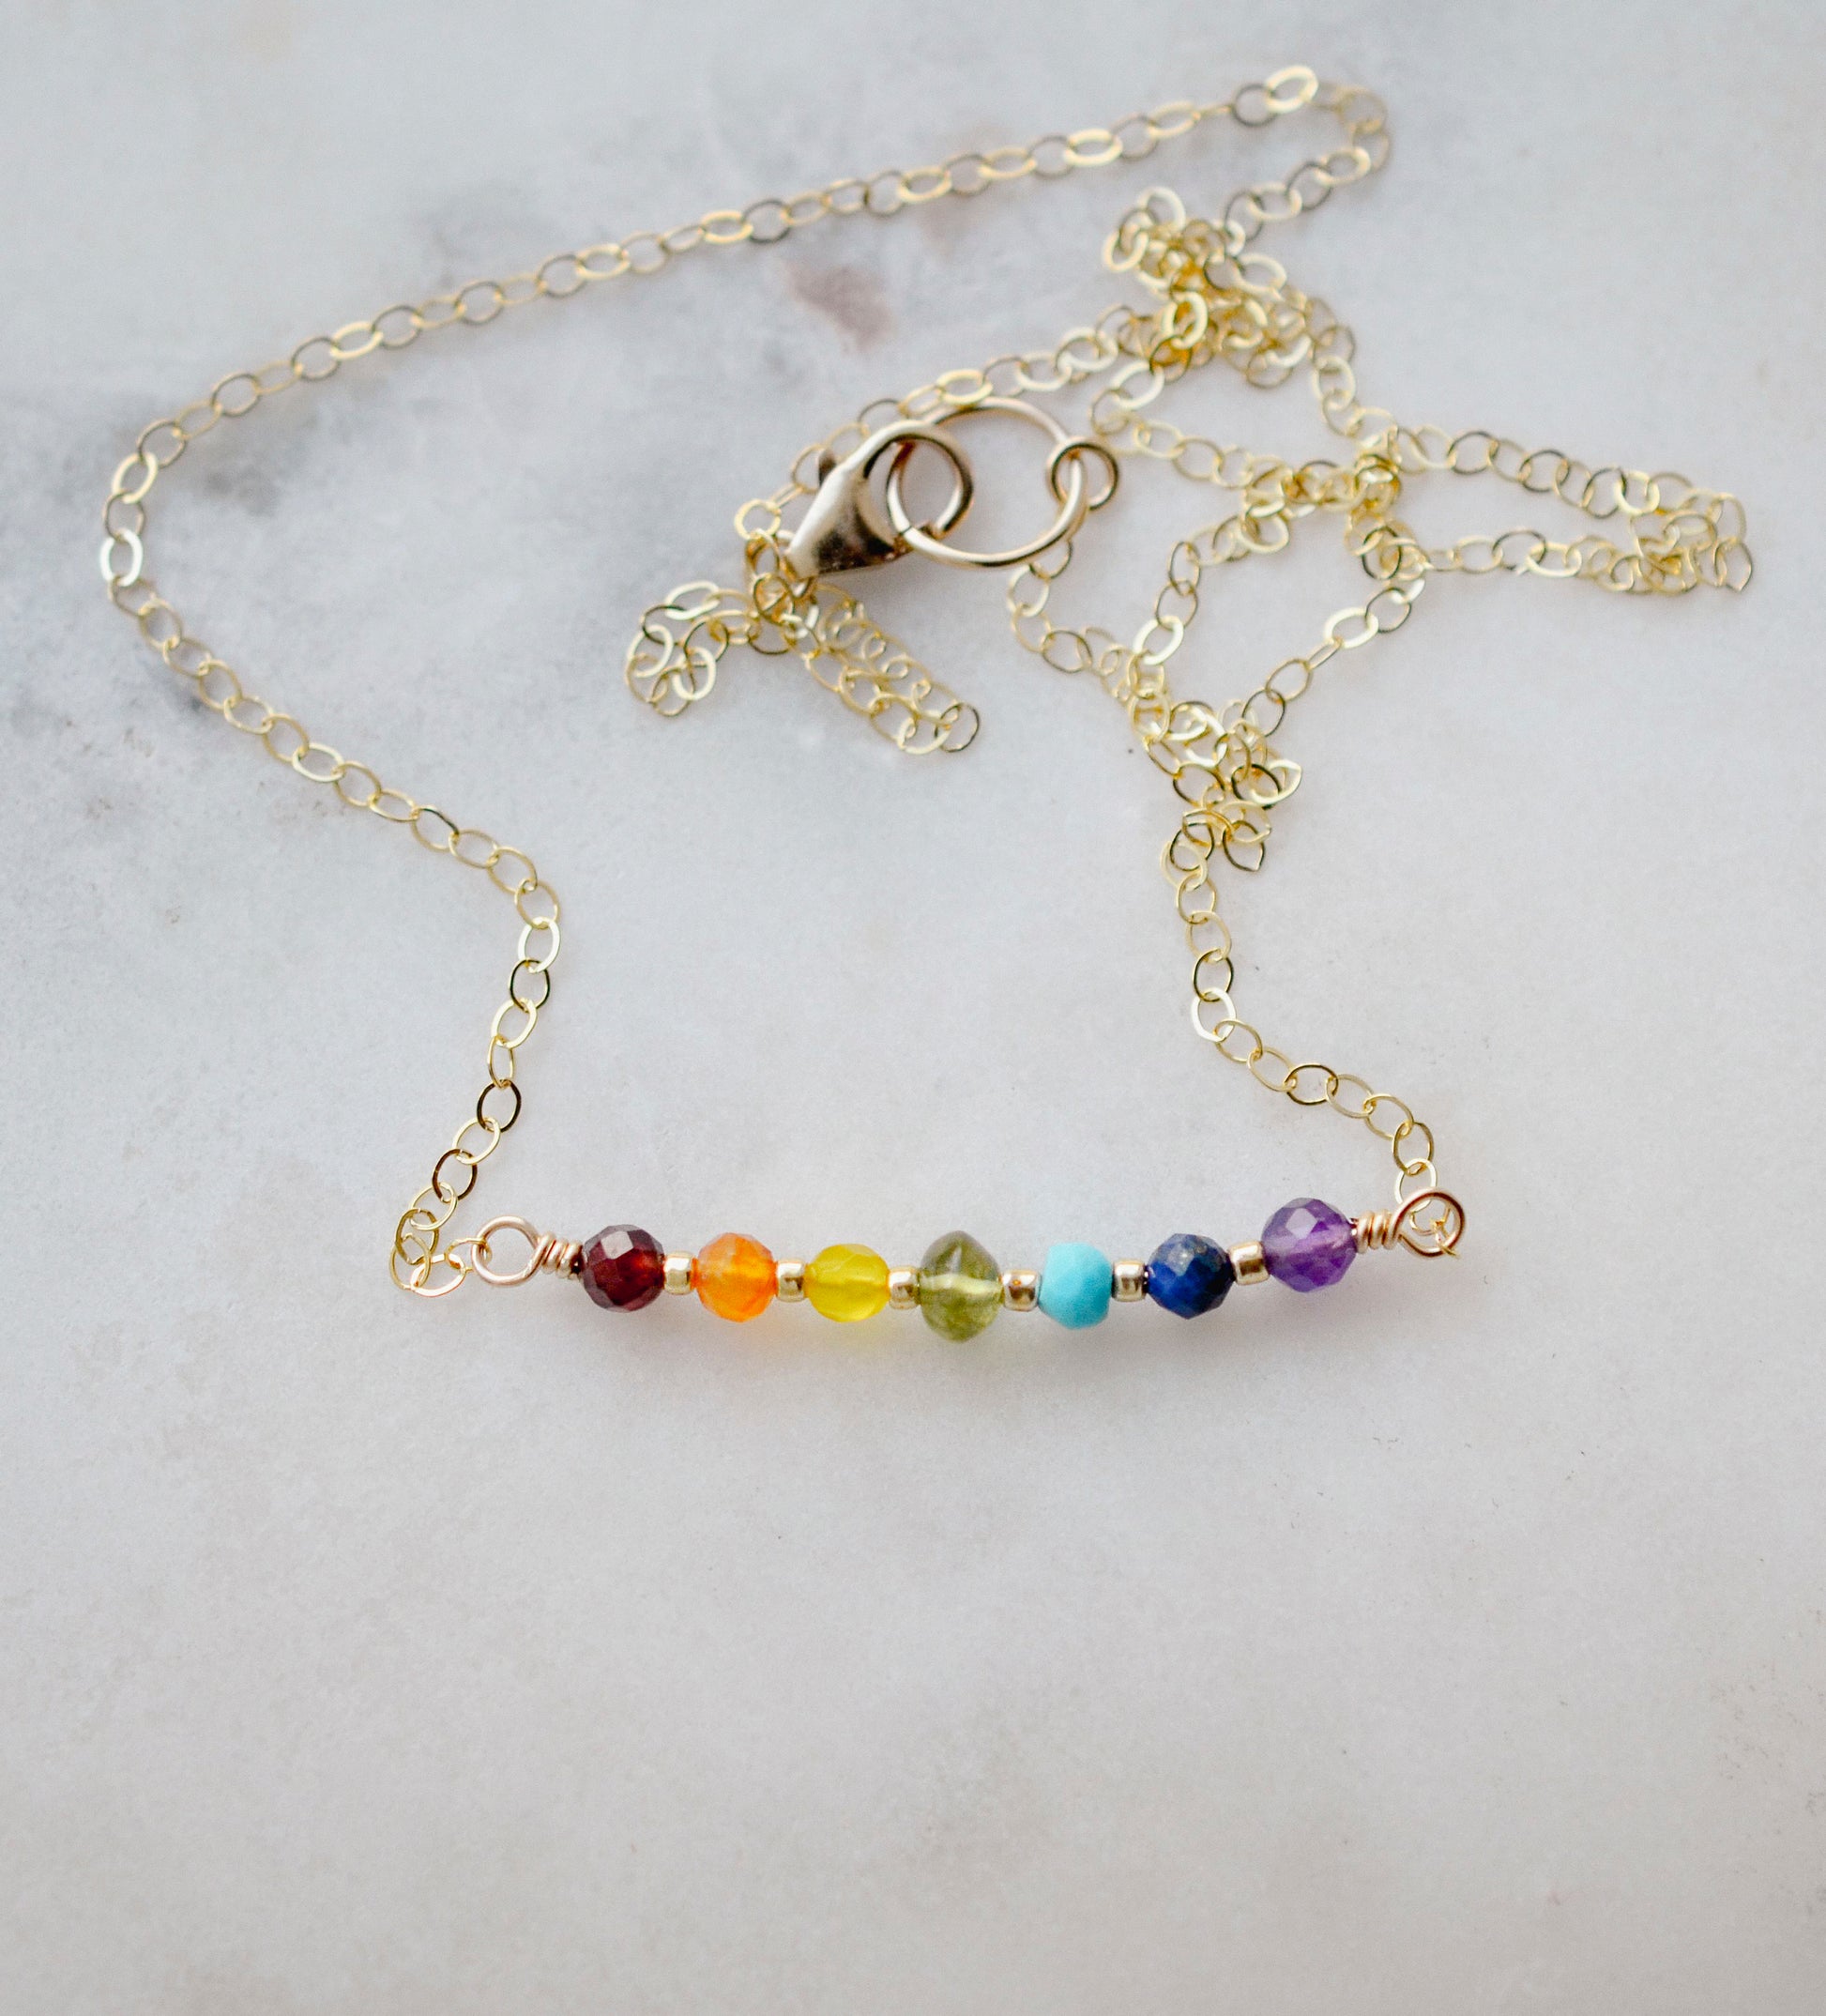 Gemstone bar necklace shown in 14k gold filled. The stones are arranged in the colors or the rainbow or chakras.